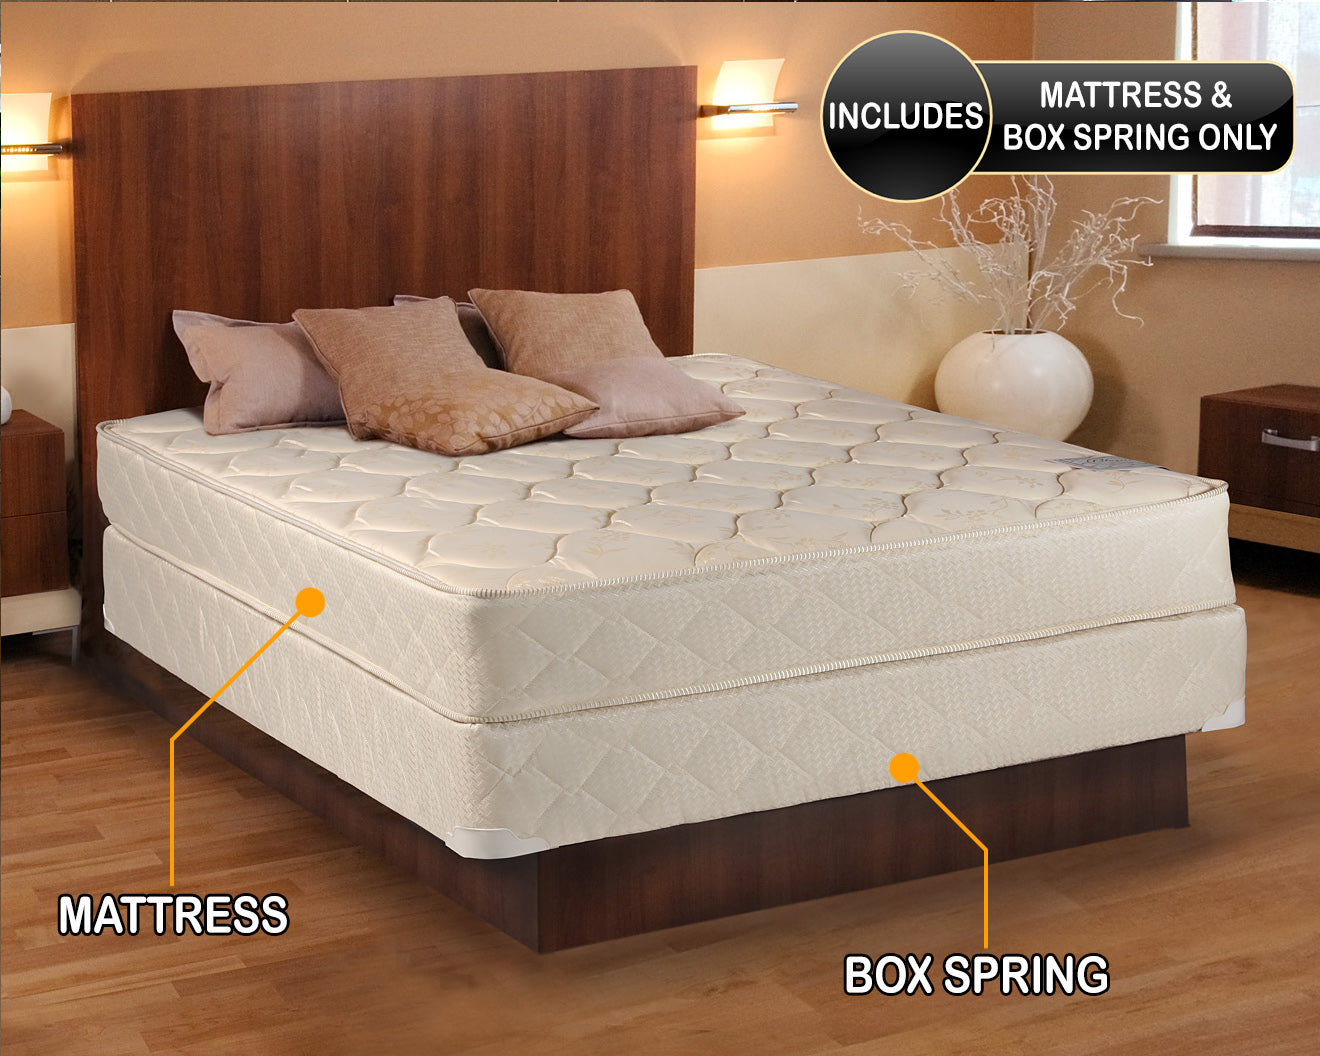 Comfort Classic Gentle Firm King Size Mattress and Box Spring Set - Fully Assembled, Orthopedic, Good for Your Back - Long Lasting and 1 Sided